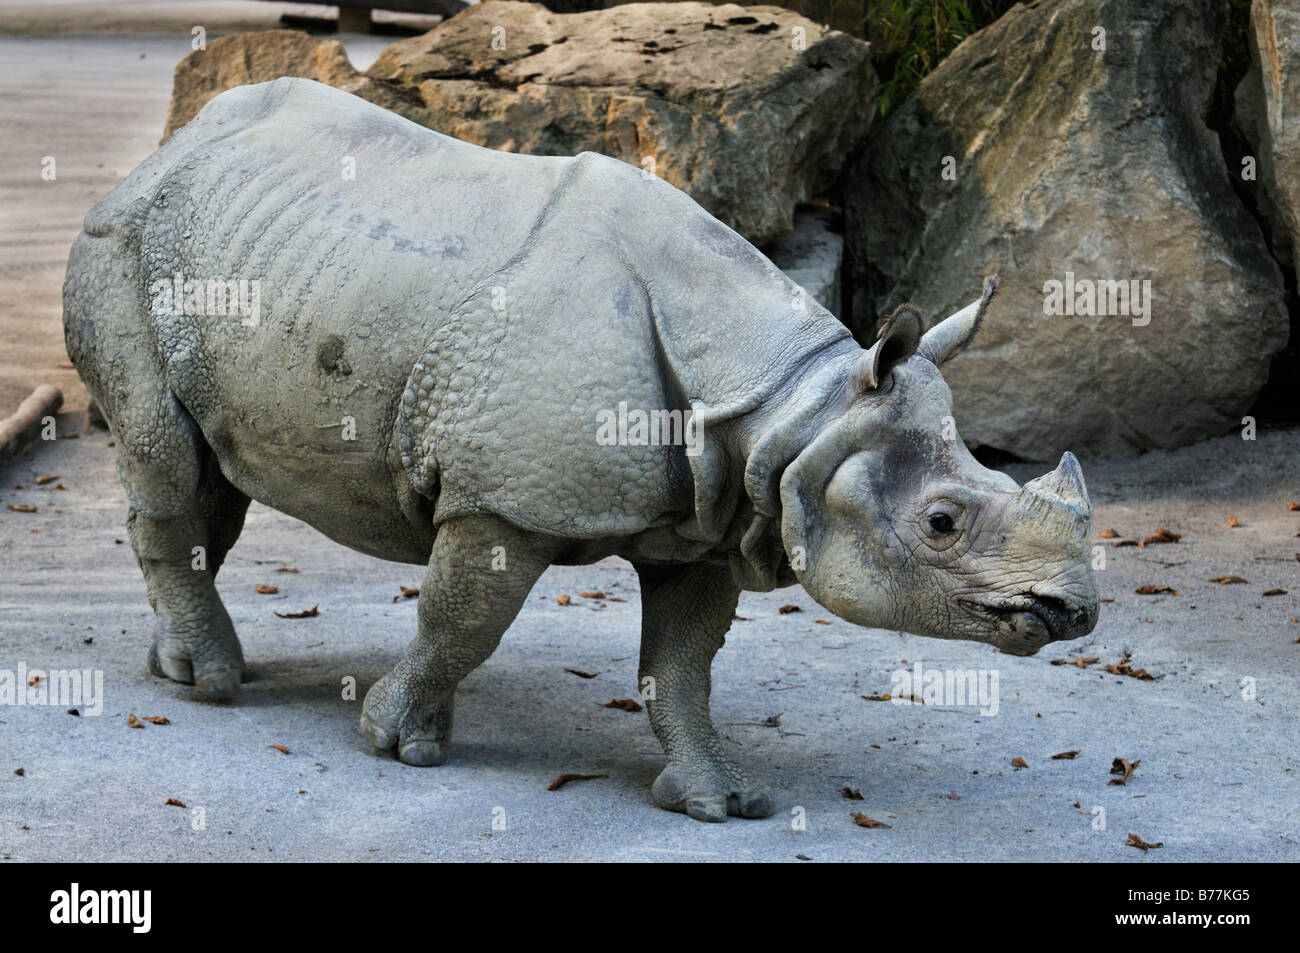 Indian Rhinocerus also Great One-horned Rhinocerus or Asian One-horned Rhinocerus (Rhinocerus unicornis), Tierpark Schoenbrunn, Stock Photo